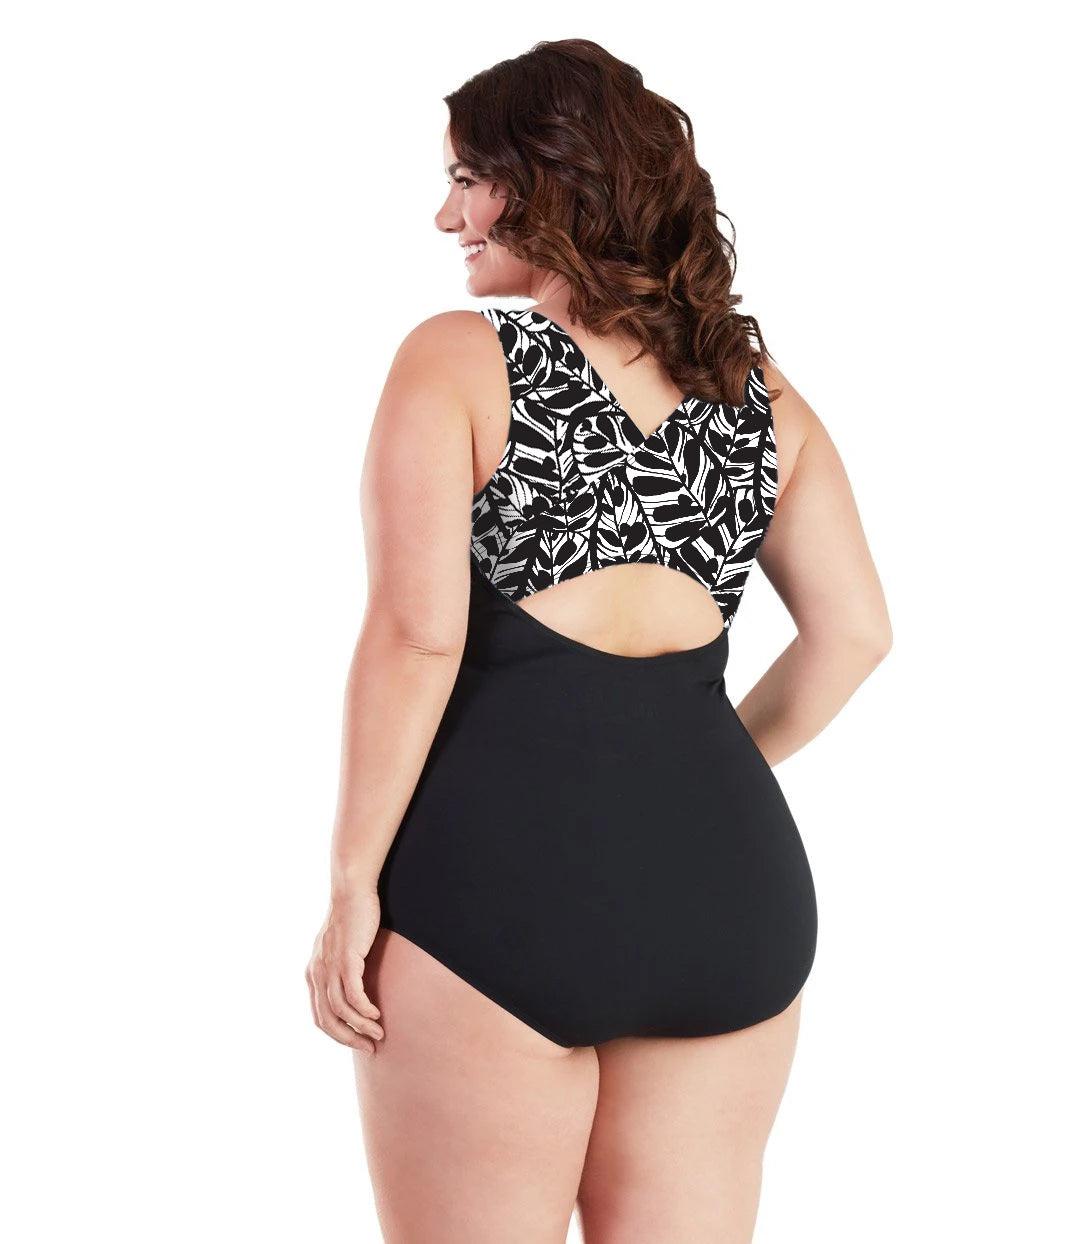 Plus size woman, back view, wearing JunoActive plus size AquaSport Crossback Tanksuit Tropical Print Black. The crossback shoulder detail of the tanksuit has a Black and white Tropical leaf print. The main body of the suit is solid black, keyhole opening at the mid-back.